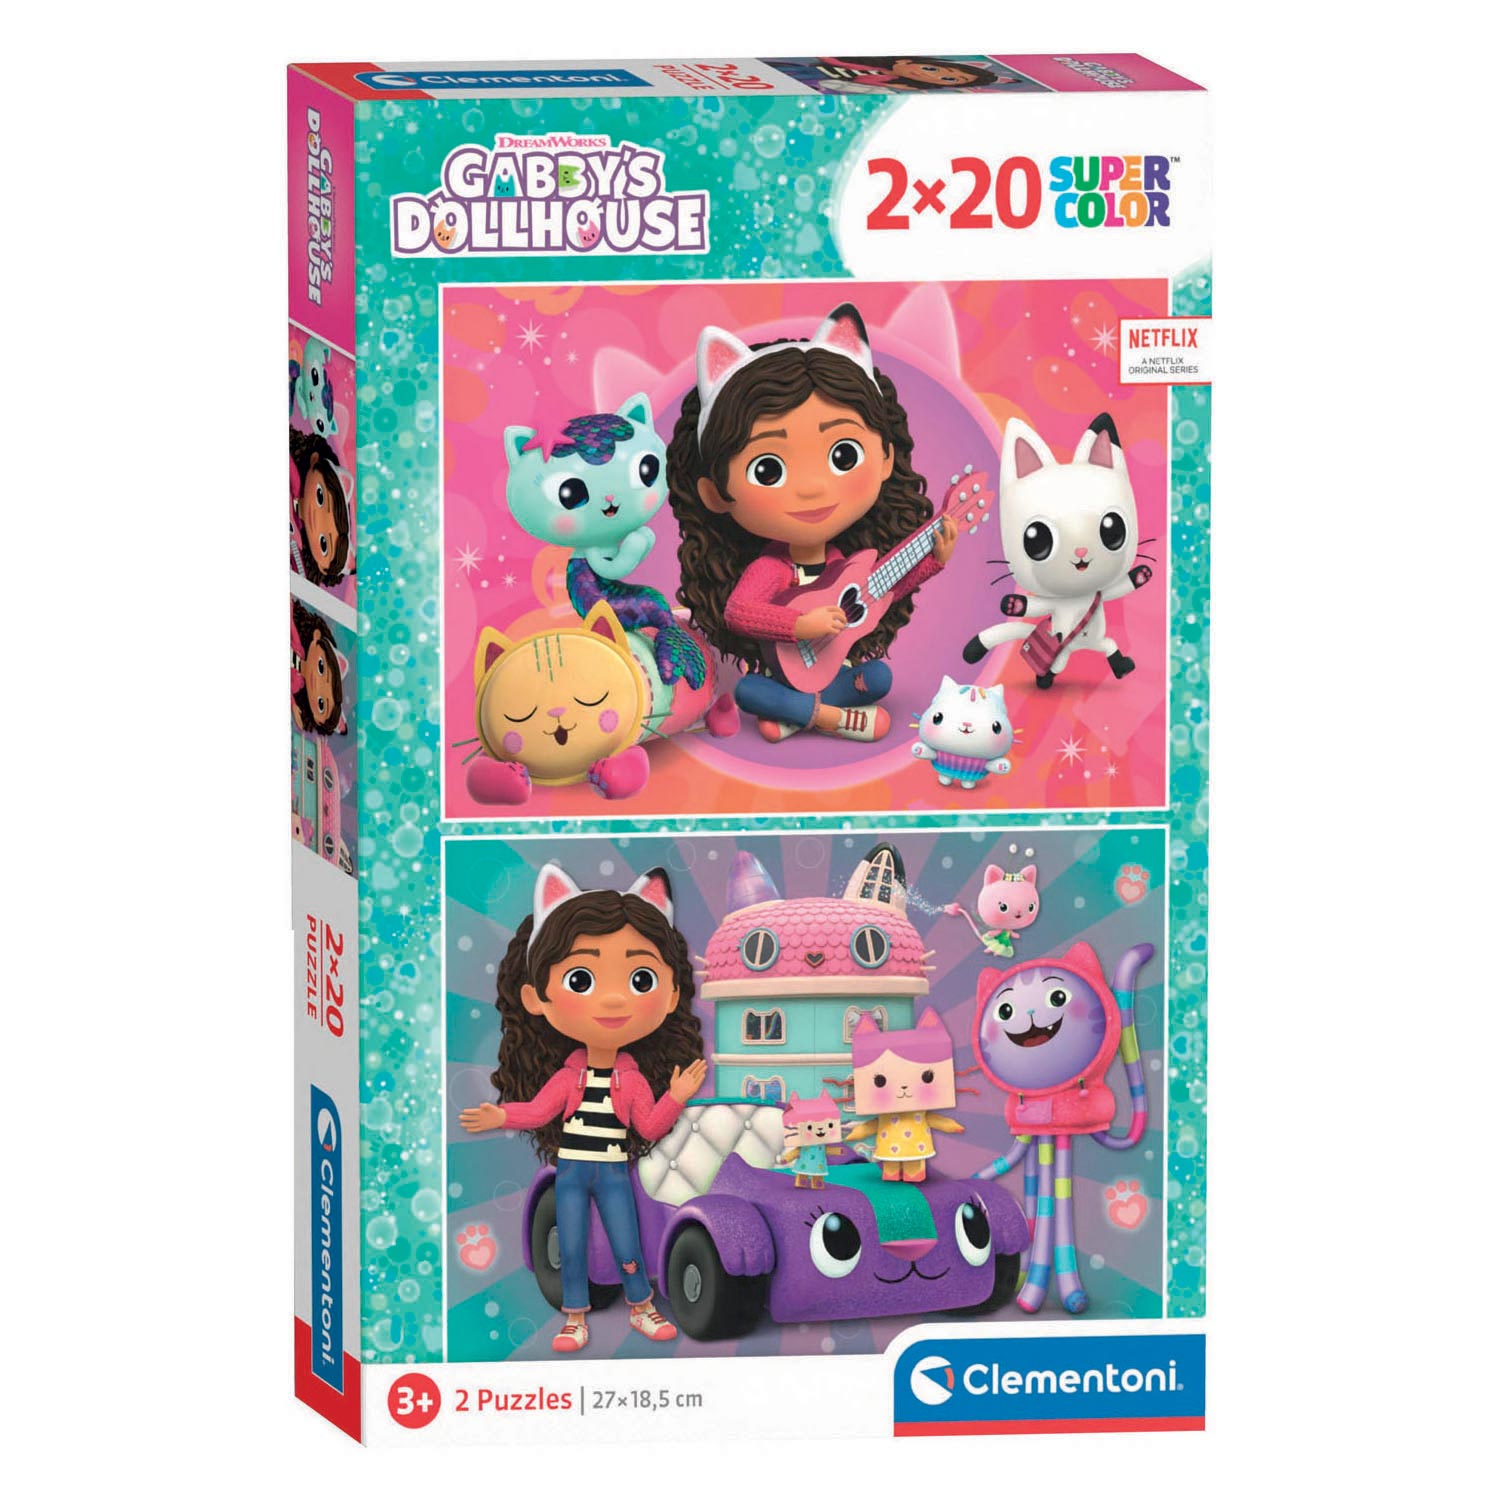 Gabby's Dollhouse, Children's Puzzles, Jigsaw Puzzles, Products